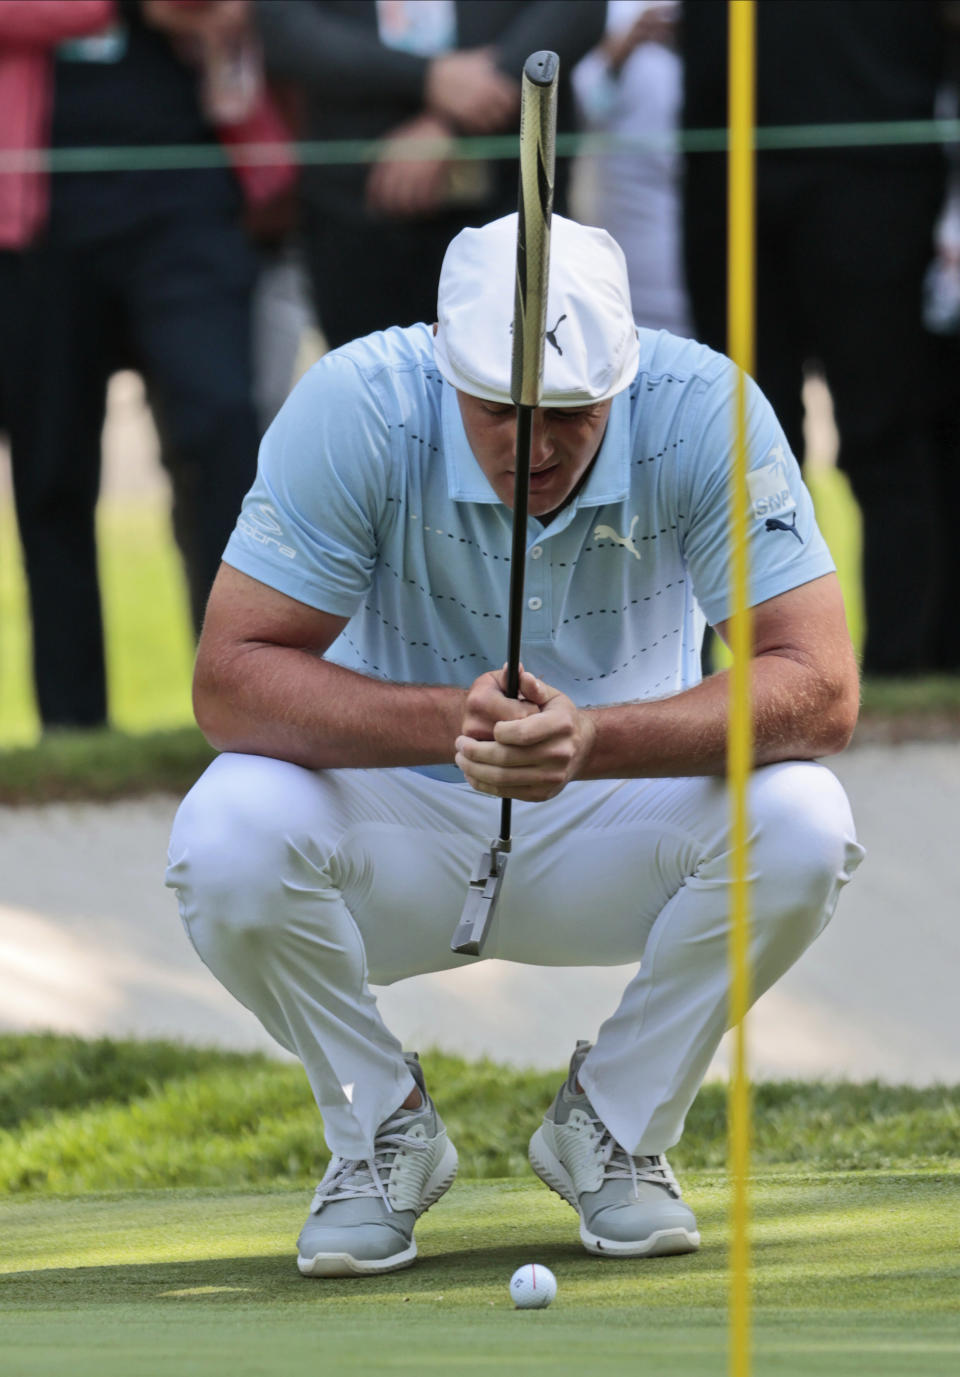 Bryson DeChambeau of the United States aligns a putt on the 9th green during the third round for the WGC-Mexico Championship golf tournament, at the Chapultepec Golf Club in Mexico City, Saturday, Feb. 22, 2020.(AP Photo/Fernando Llano)